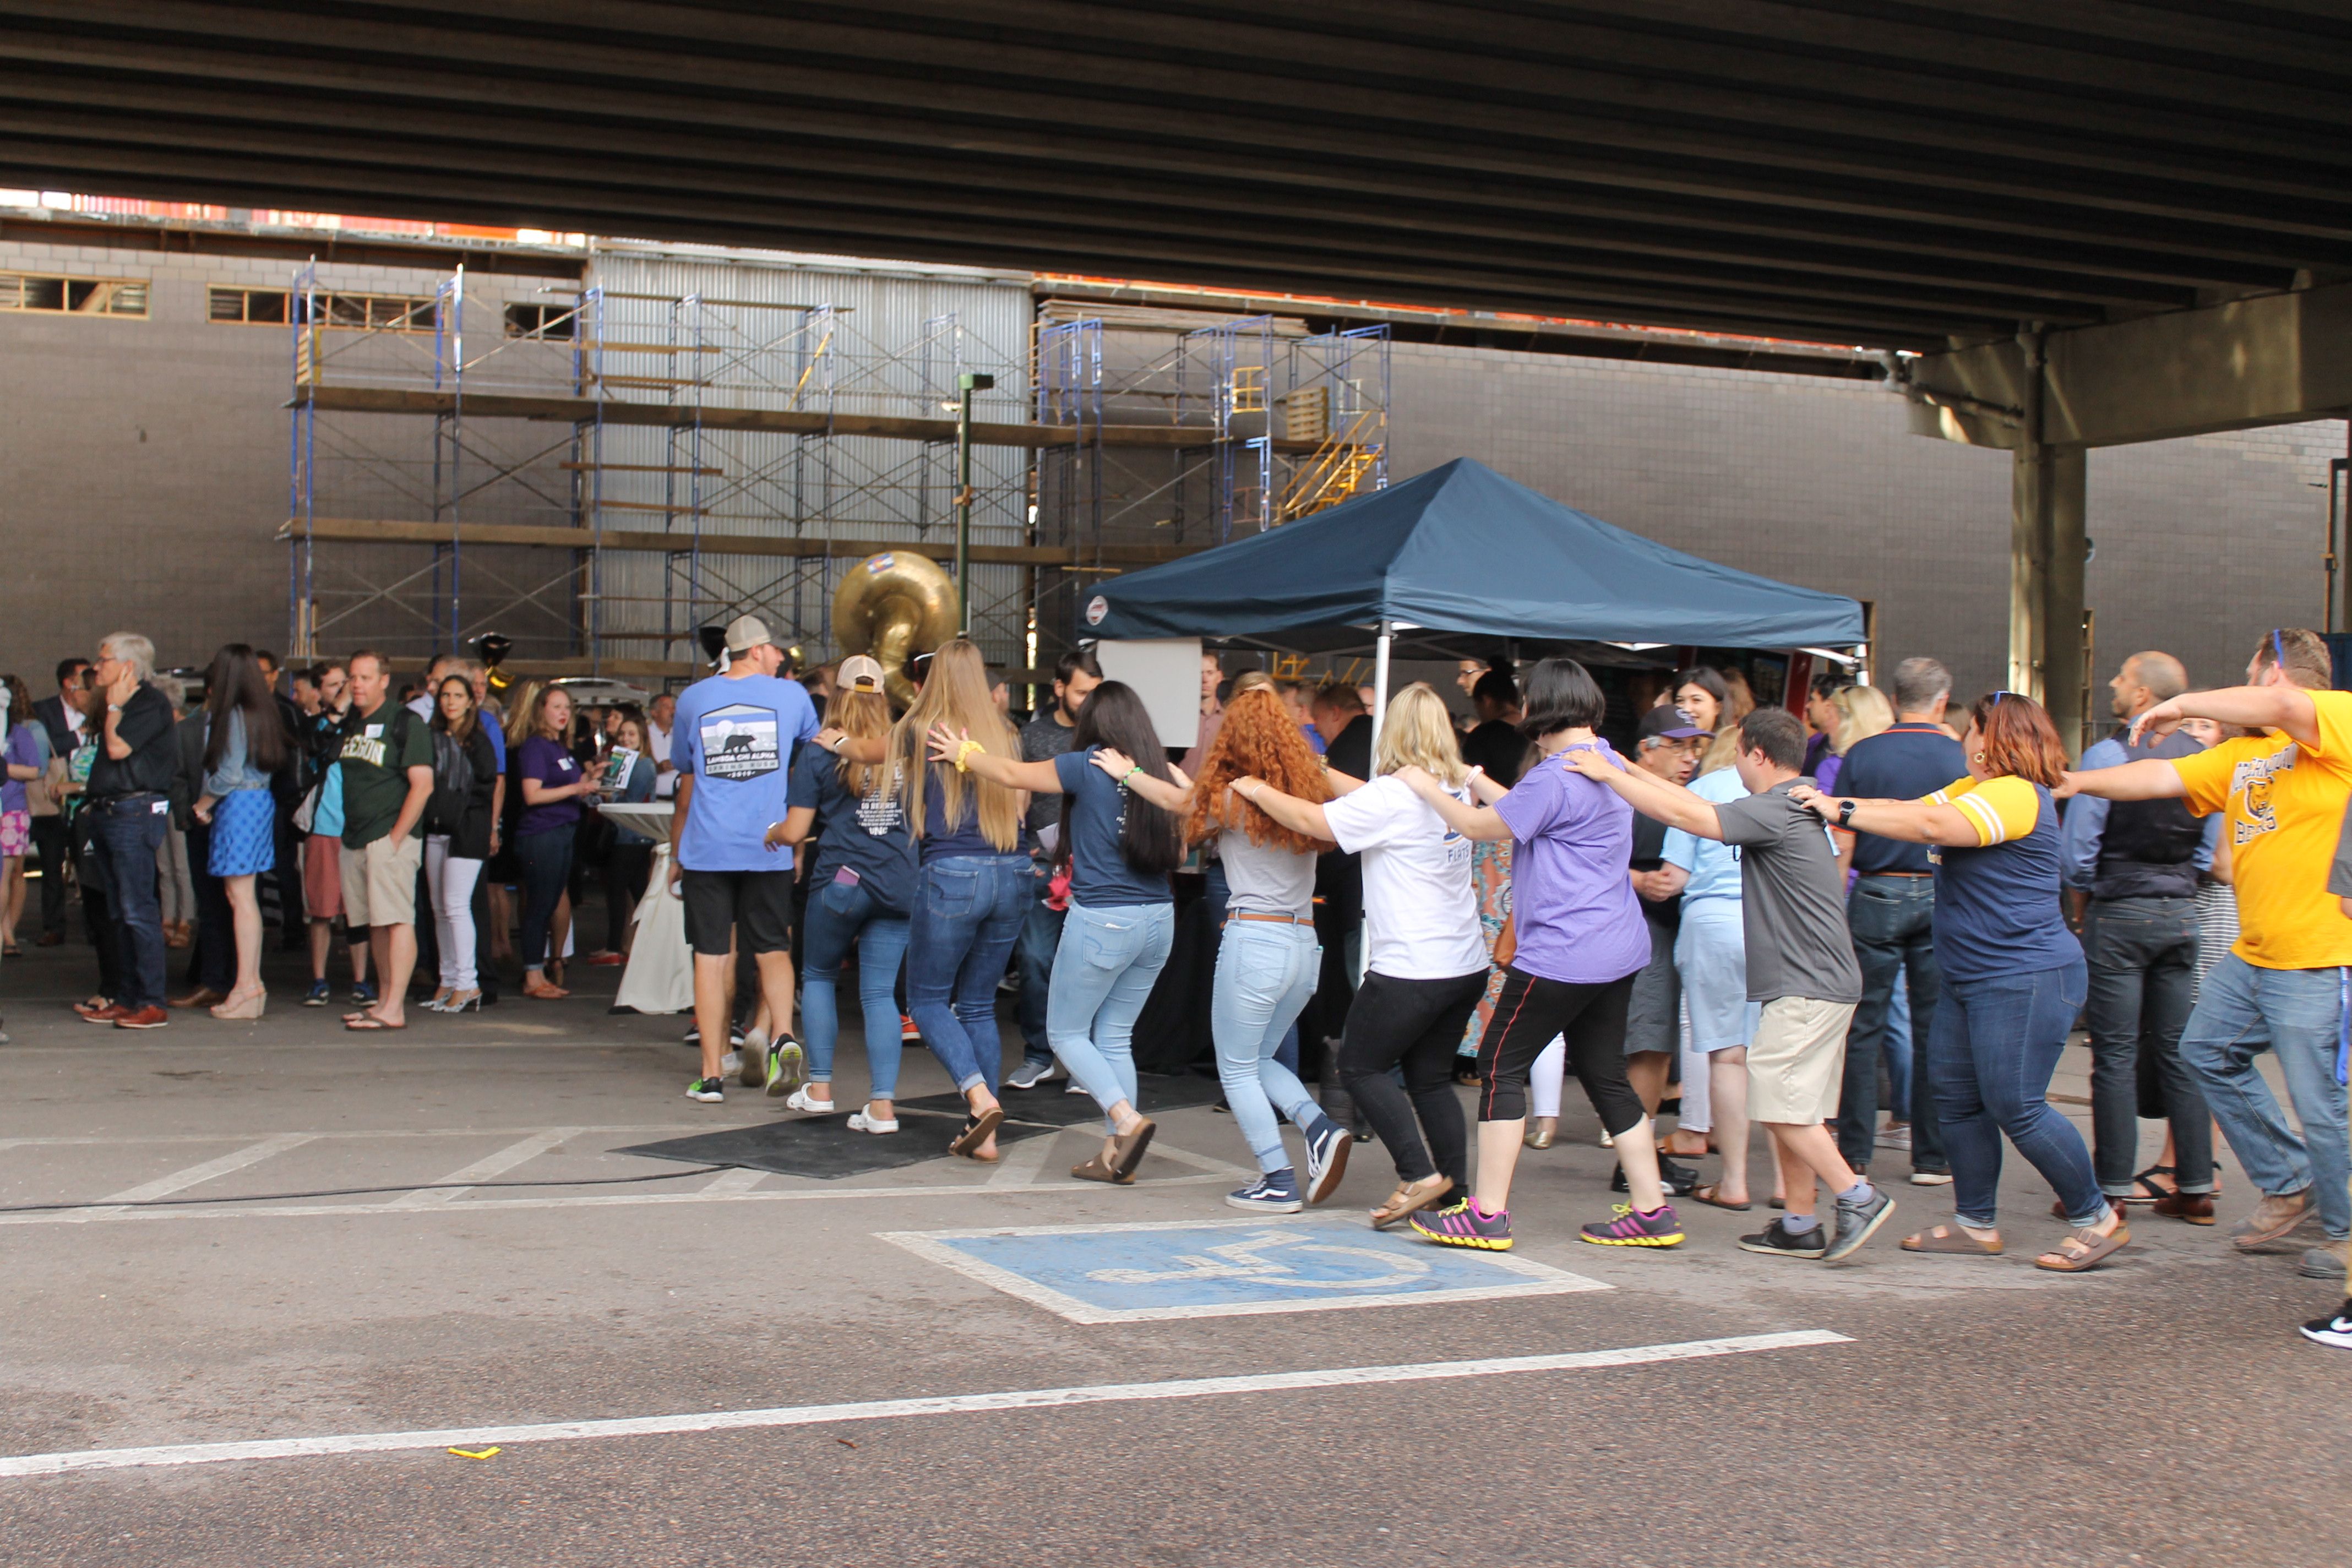 Group of people form a congo line in a parking lot